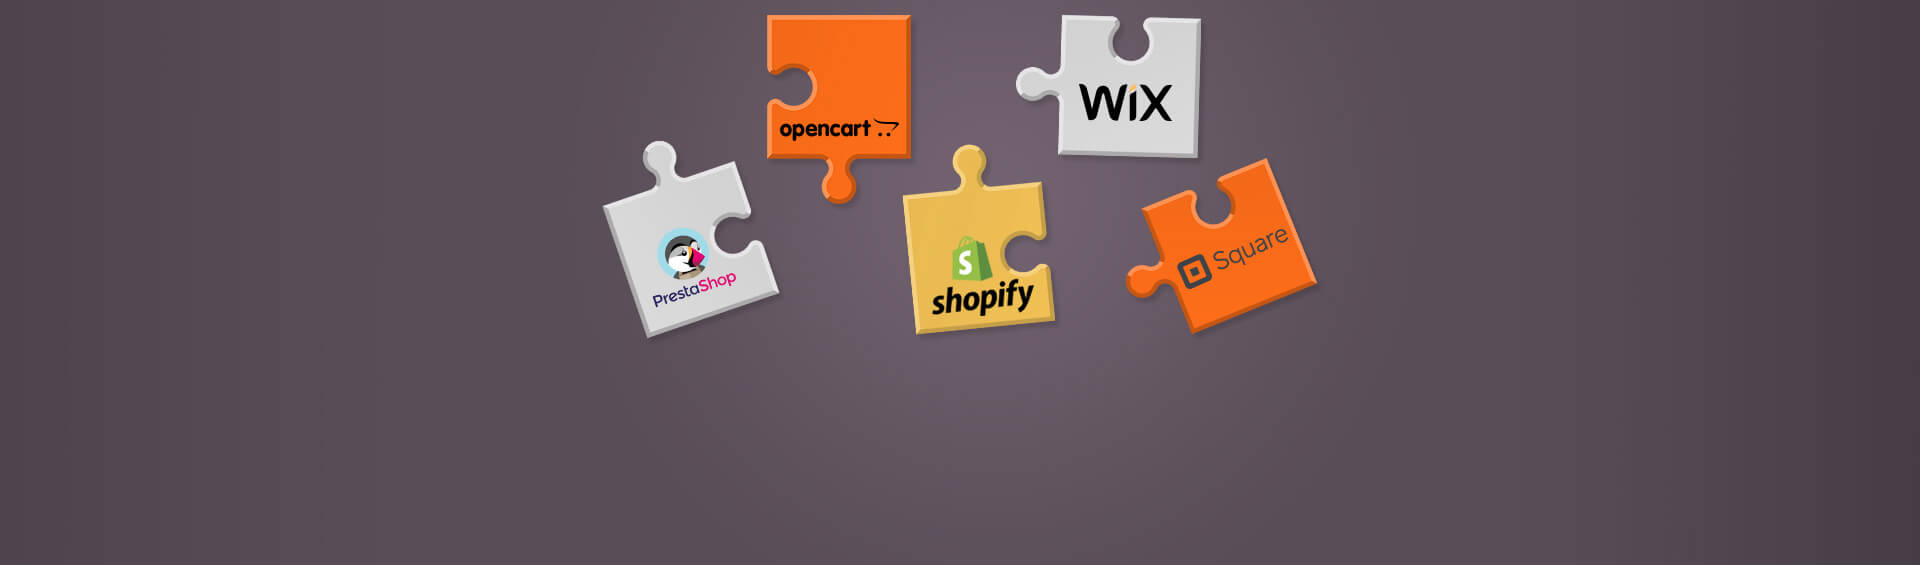 10 Best Ecommerce Platforms Compared and Reviewed